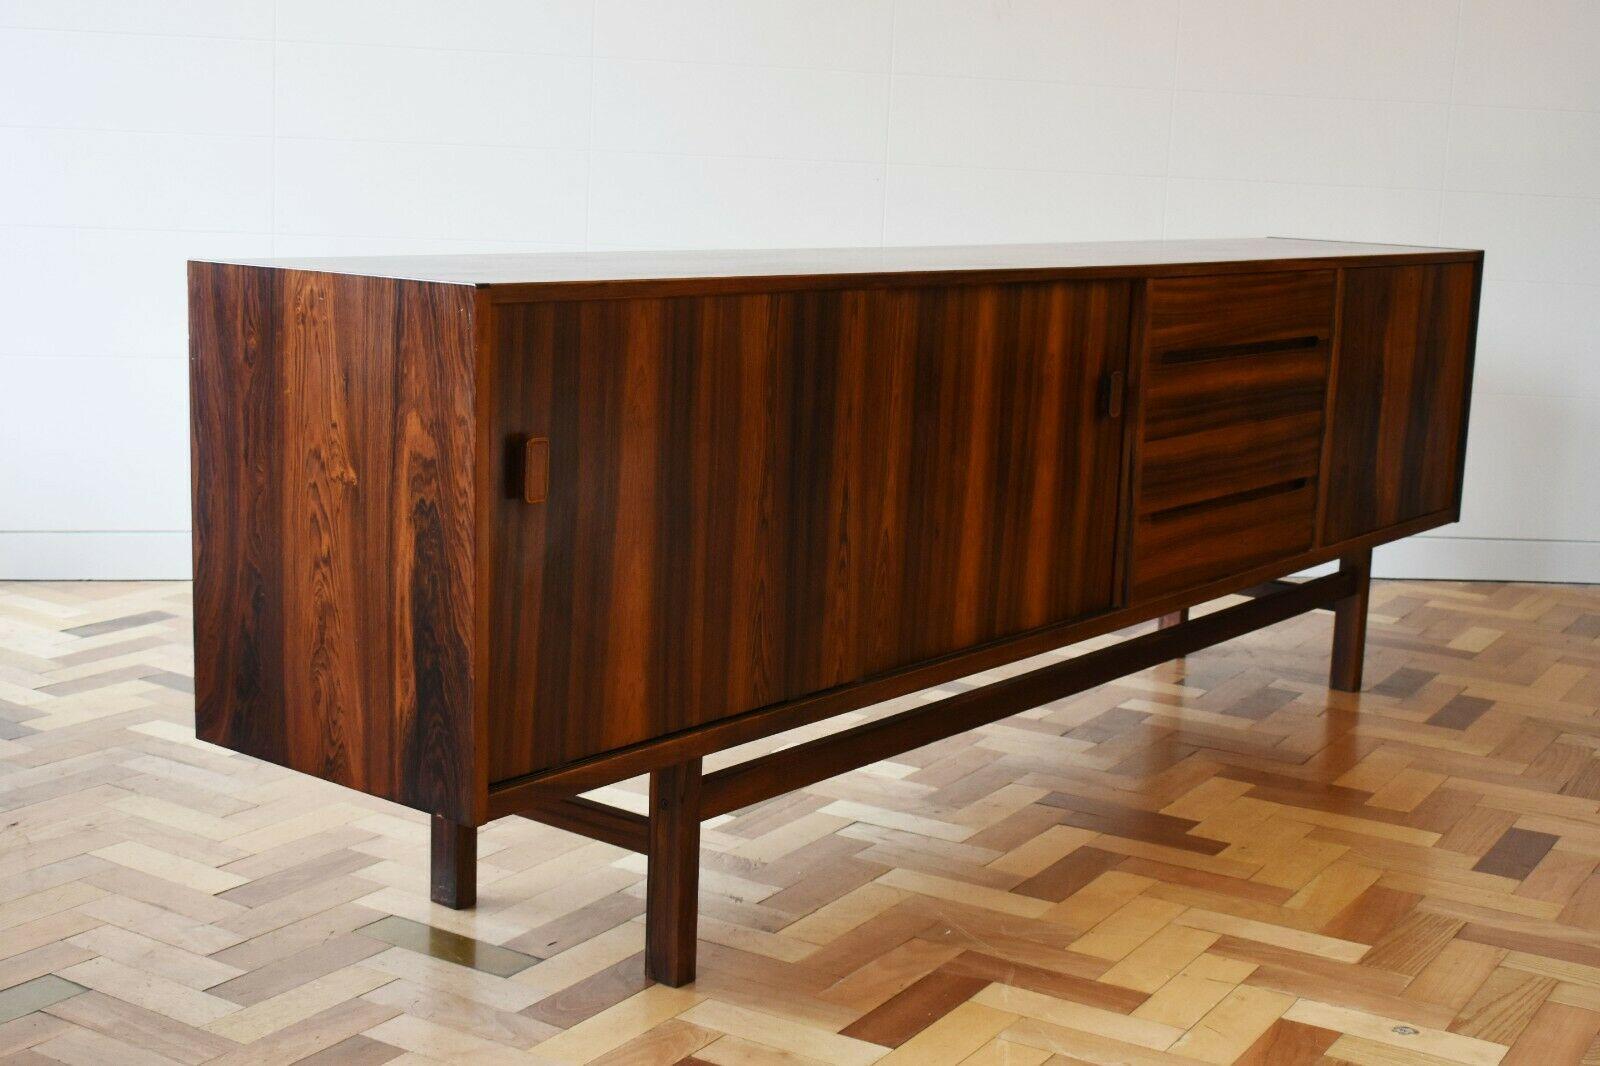 Mid 20th century rosewood sideboard designed by Nils Jonsson for Troeds.

This fabulous sideboard was designed in Sweden by Nils Jonsson for Hugo Troeds in the 1960s/70s. It features a stunning deep brown rosewood, with an intricate wood patterned